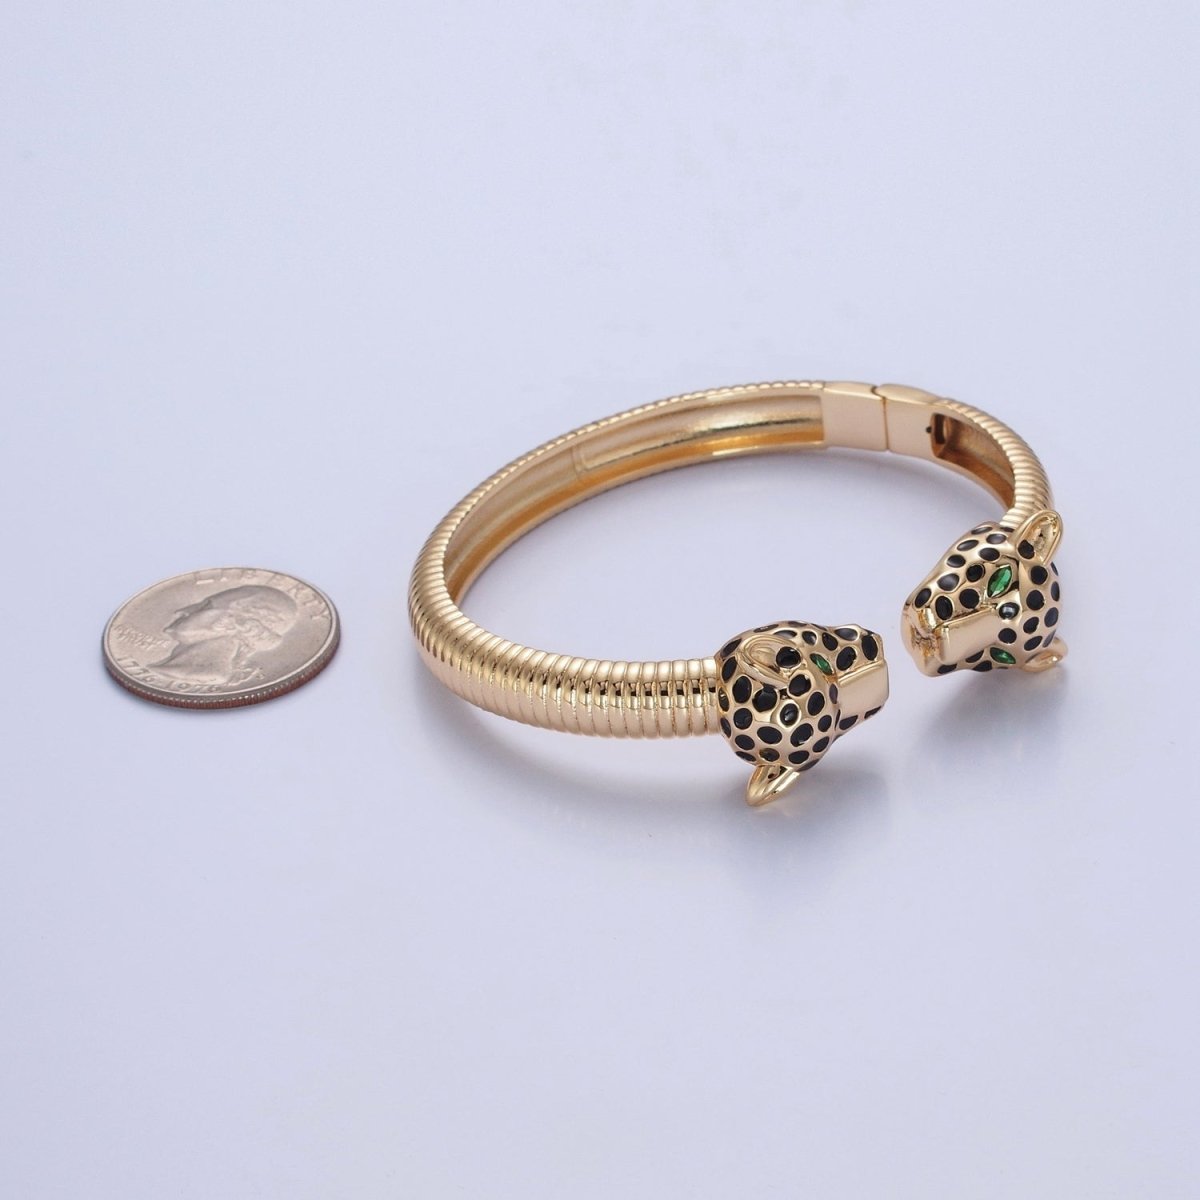 24K Gold Filled Cat Cheetah Bangle Bracelet in silver & gold | WA-990 WA-991 Clearance Pricing - DLUXCA